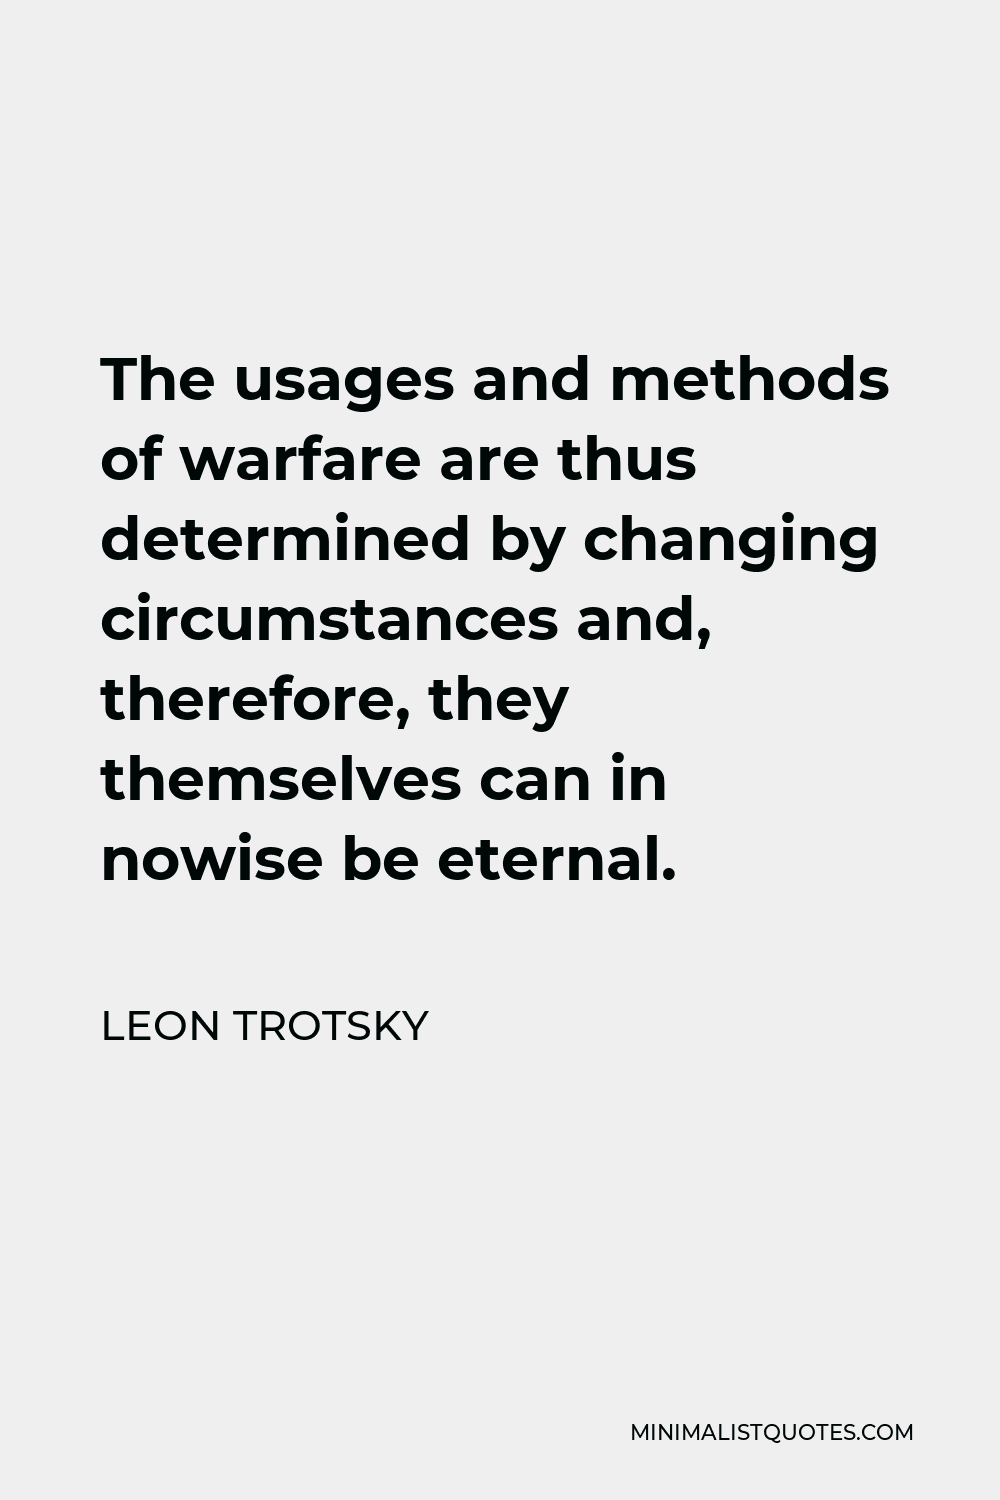 Leon Trotsky Quote - The usages and methods of warfare are thus determined by changing circumstances and, therefore, they themselves can in nowise be eternal.